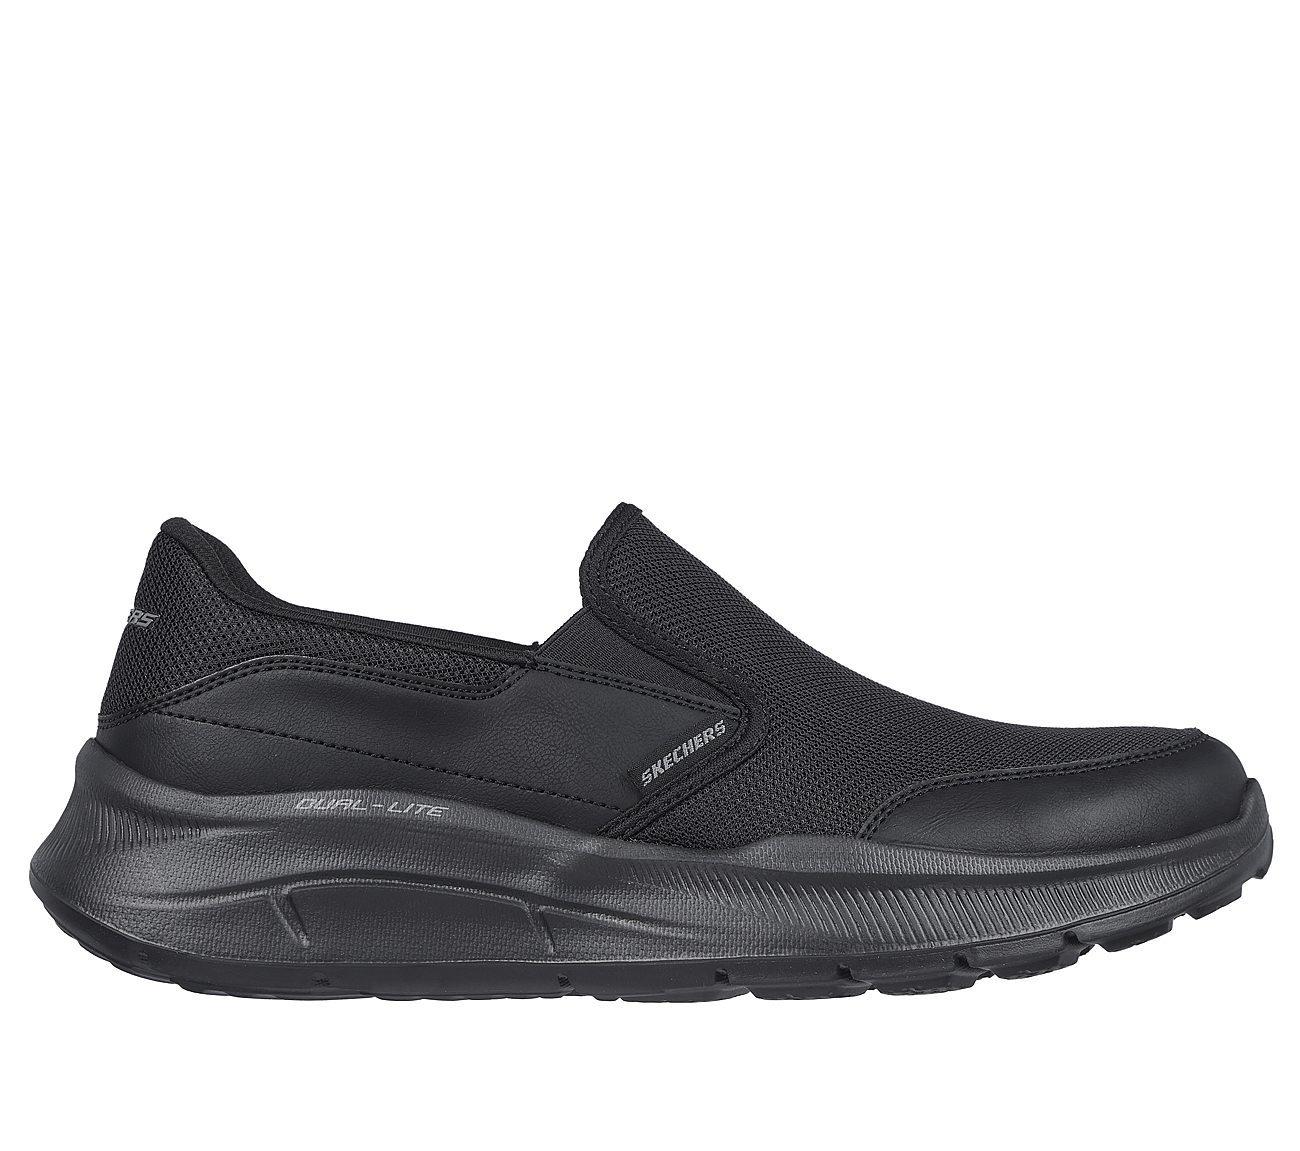 EQUALIZER 5.0 - PERSISTABLE, BBLACK Footwear Lateral View